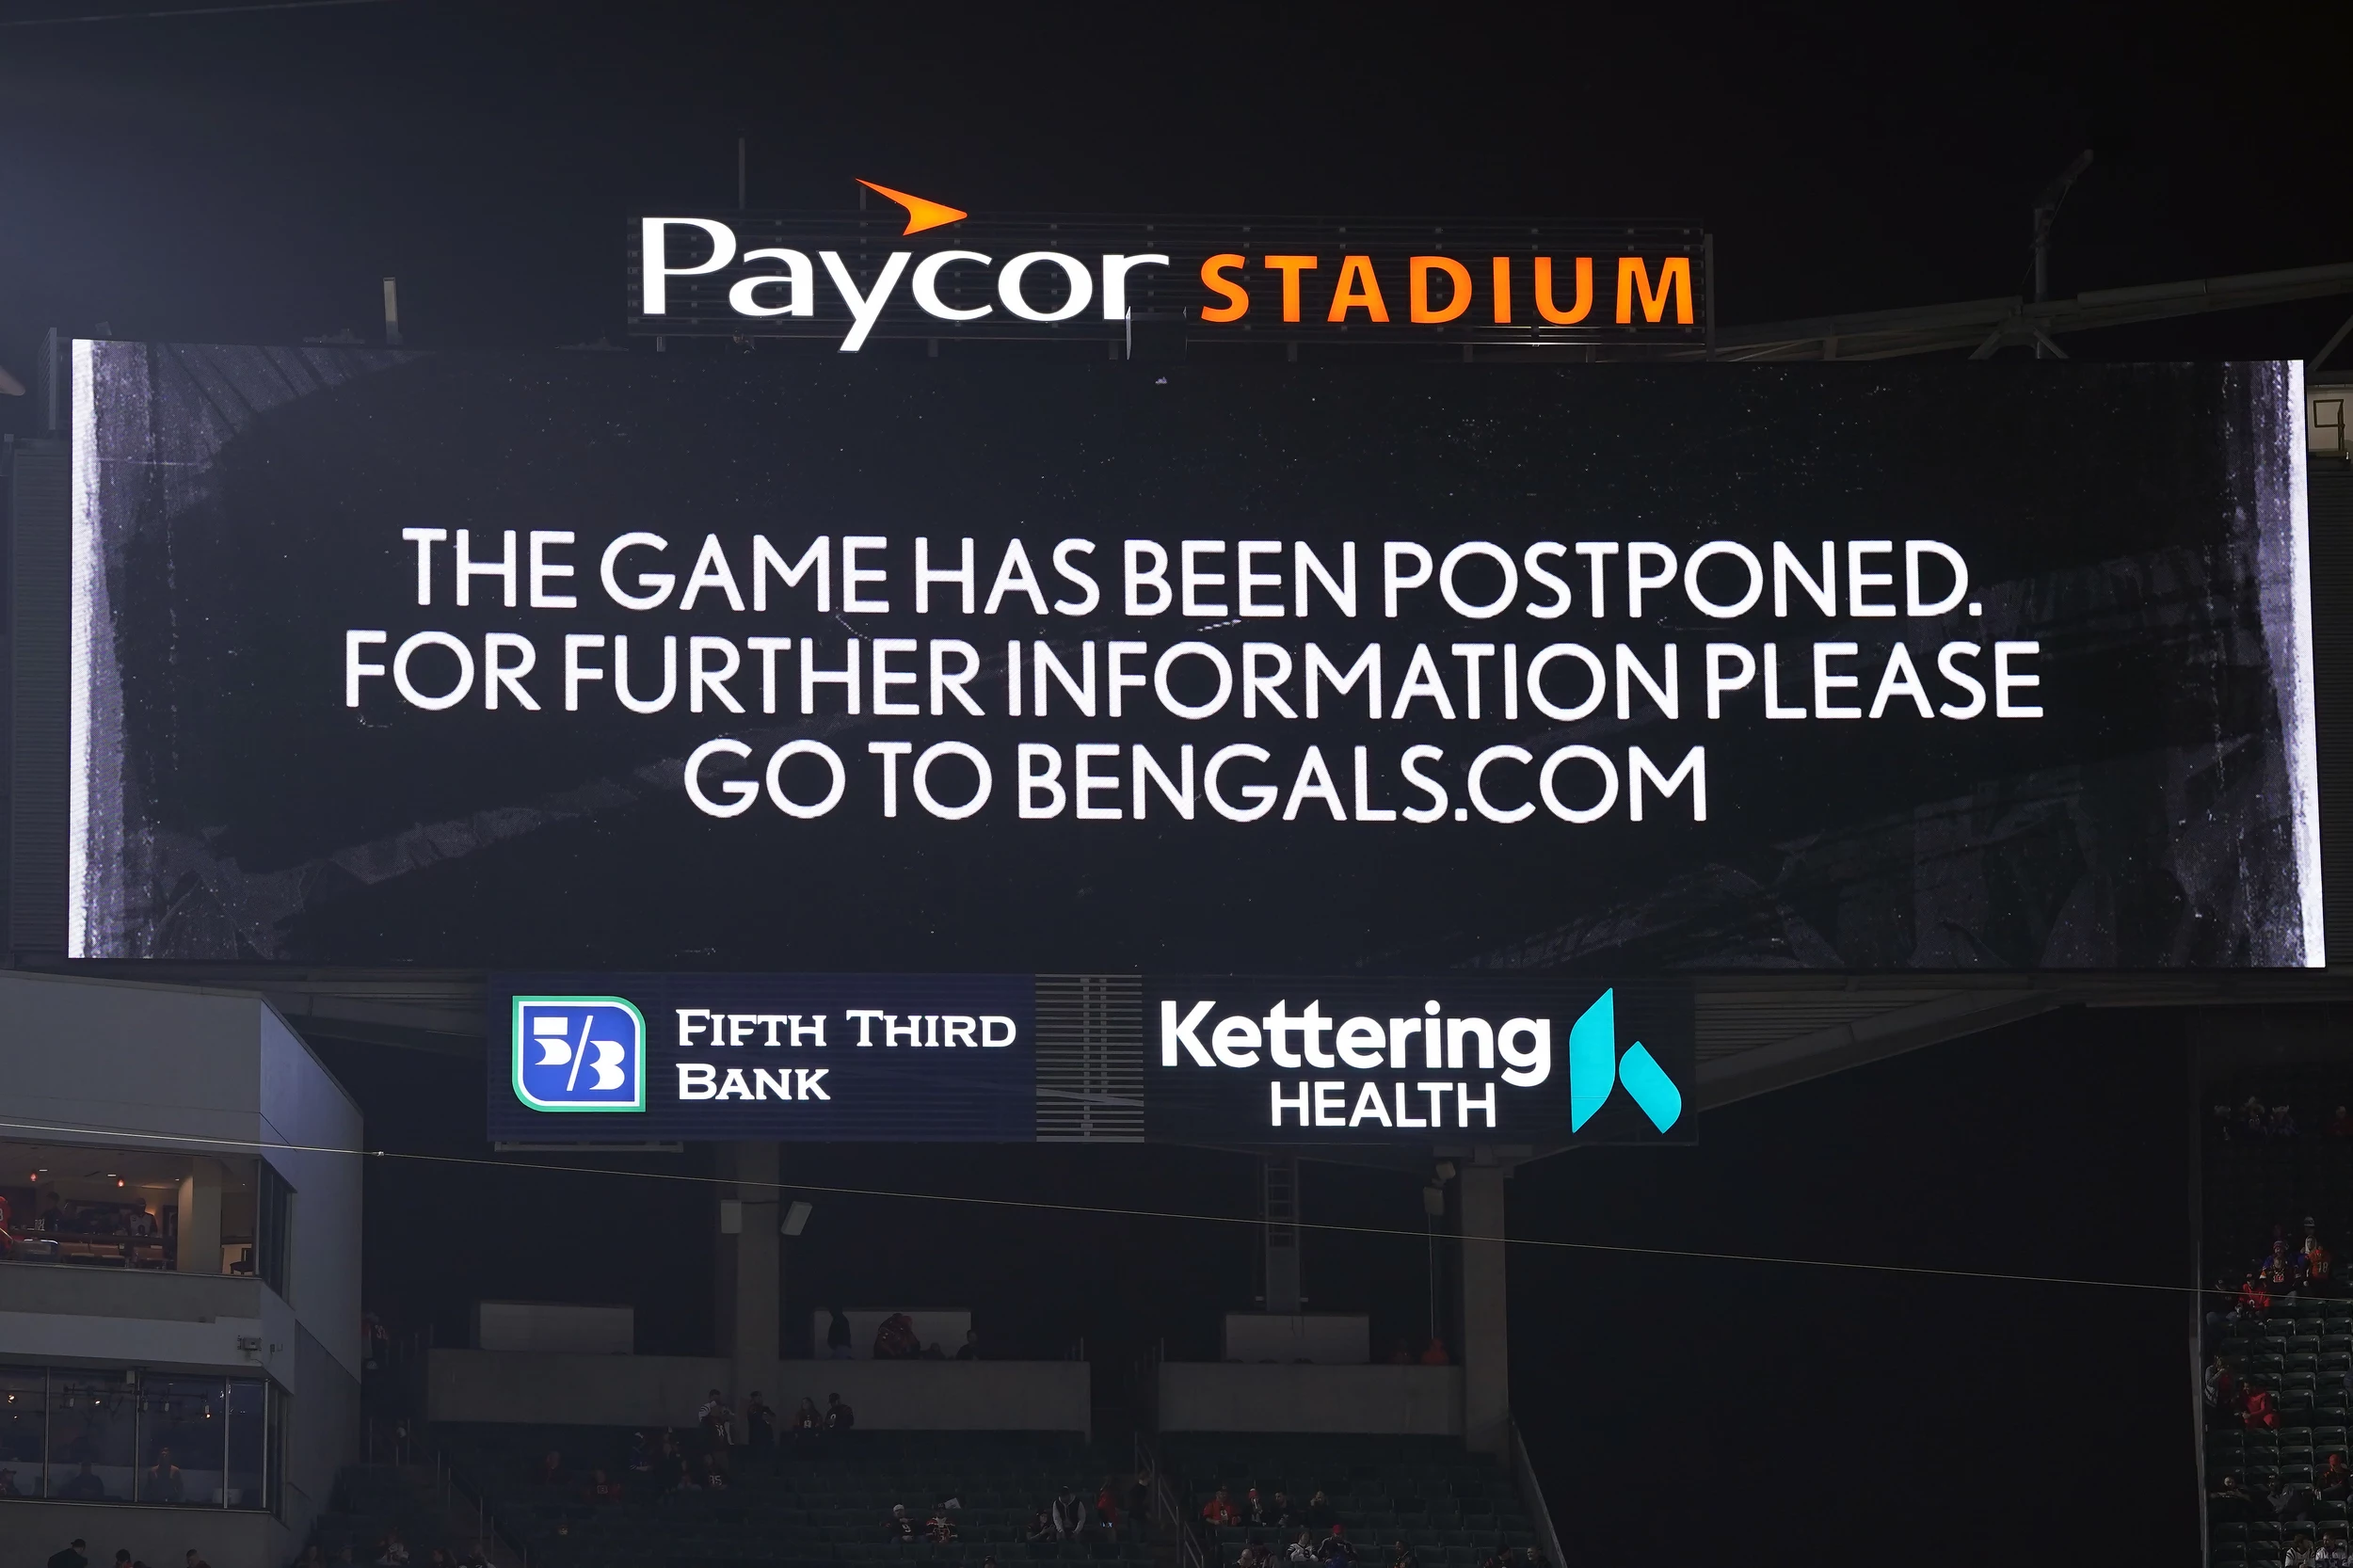 NFL picks possible neutral site location for possible AFC Championship game  following Bills-Bengals cancellation